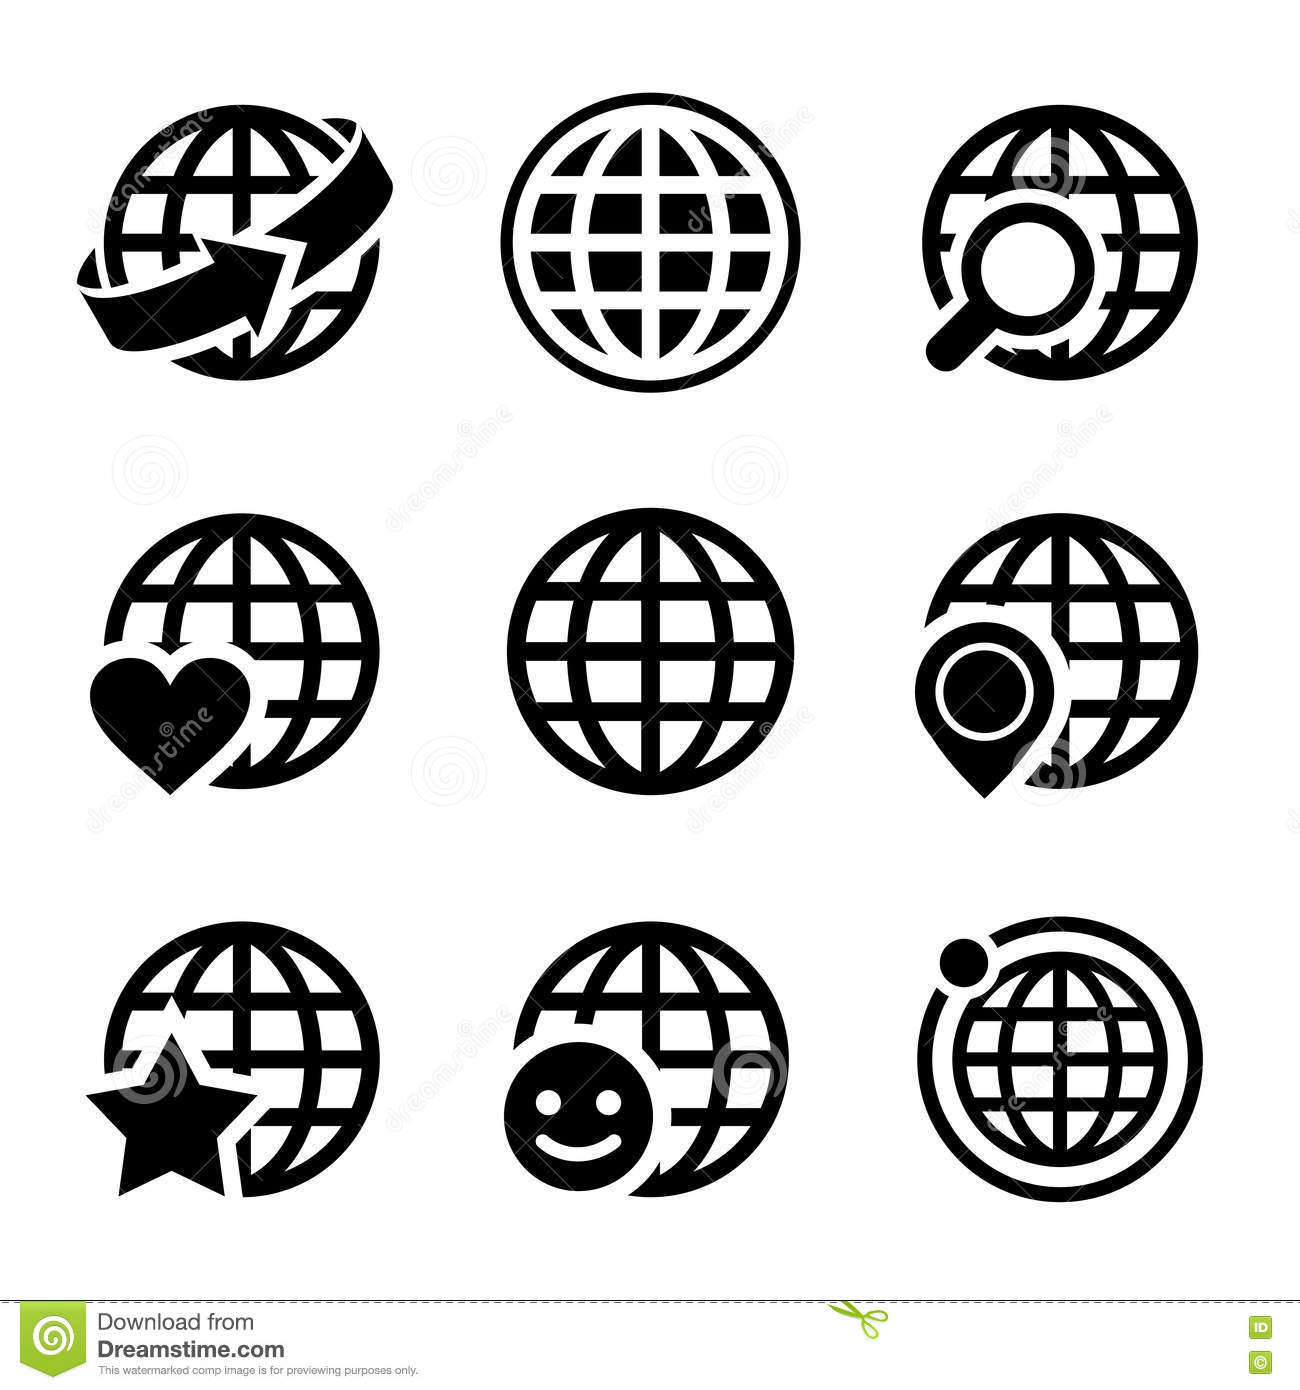 Earth Black and White Vector Icons